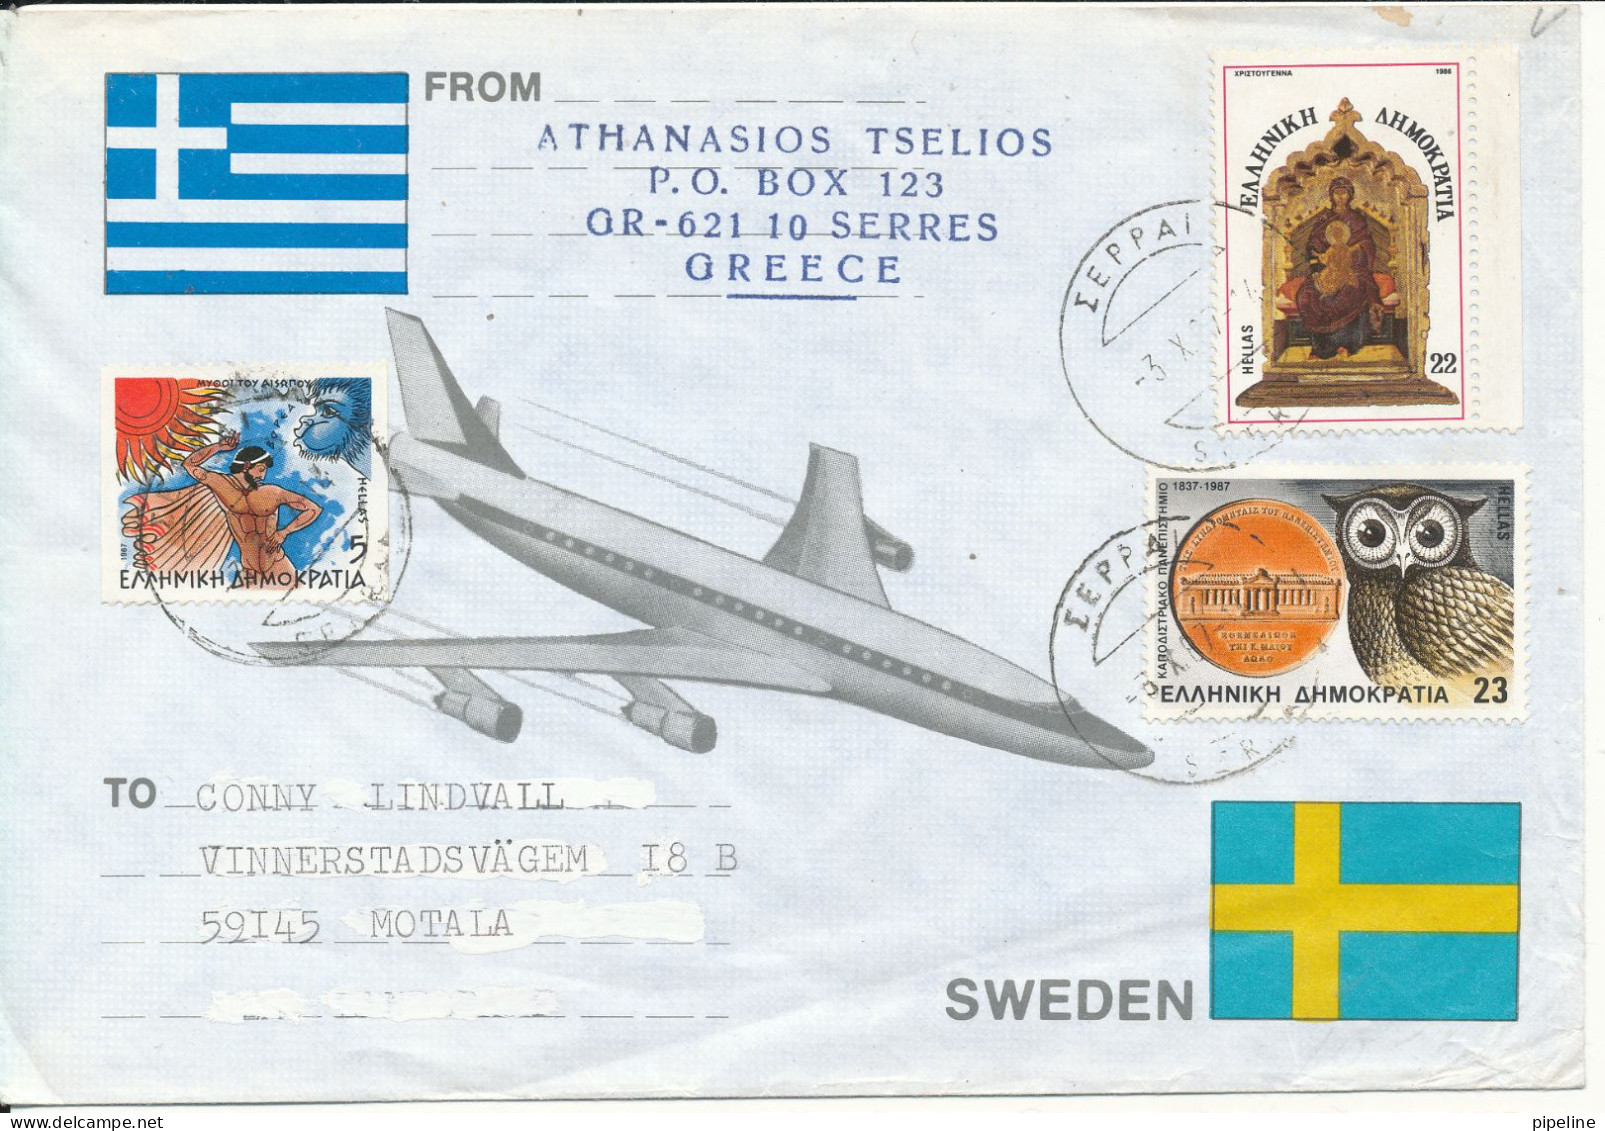 Greece Air Mail Cover Sent To Sweden 3-10-1987 See The BASKETBALL Label On The Backside Of The Cover - Athos